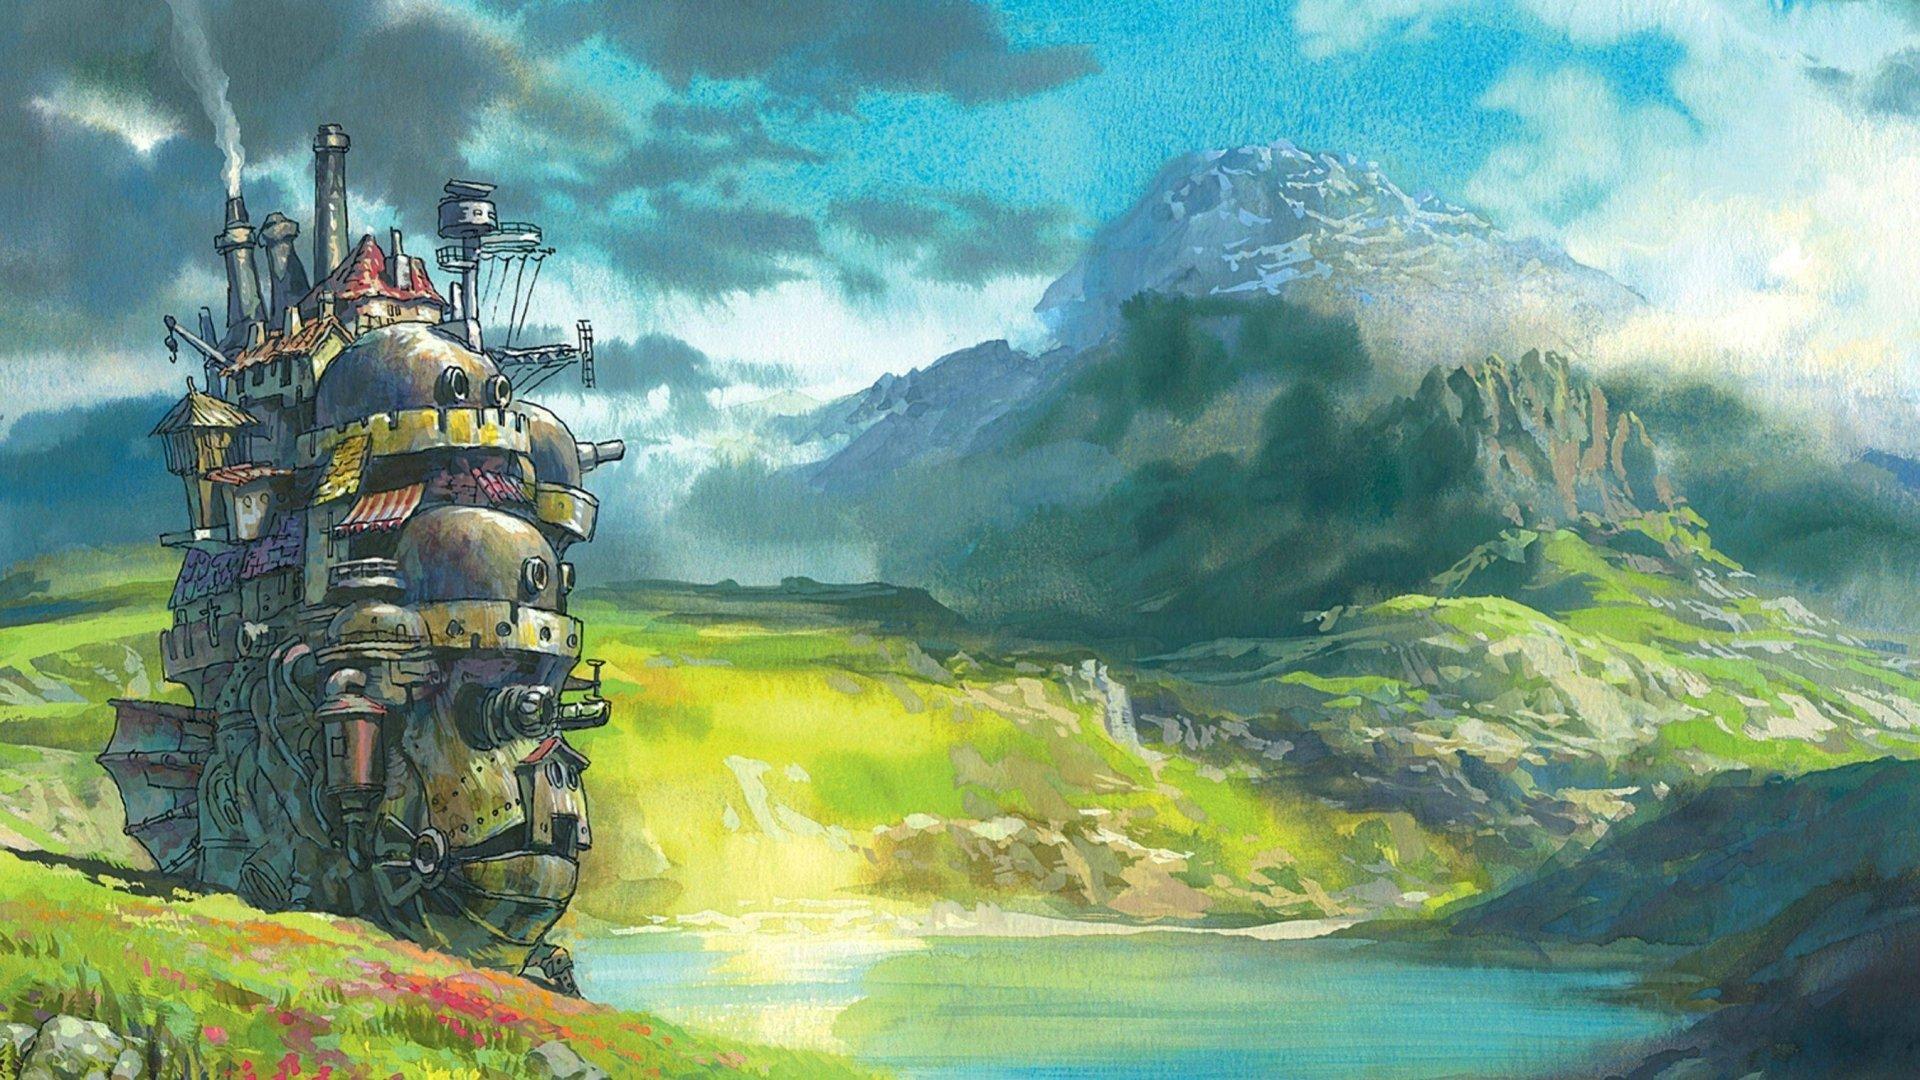 Wallpaper ID 303173  Anime Howls Moving Castle Phone Wallpaper Howl  Jenkins Pendragon Sophie Hatter 1440x3200 free download